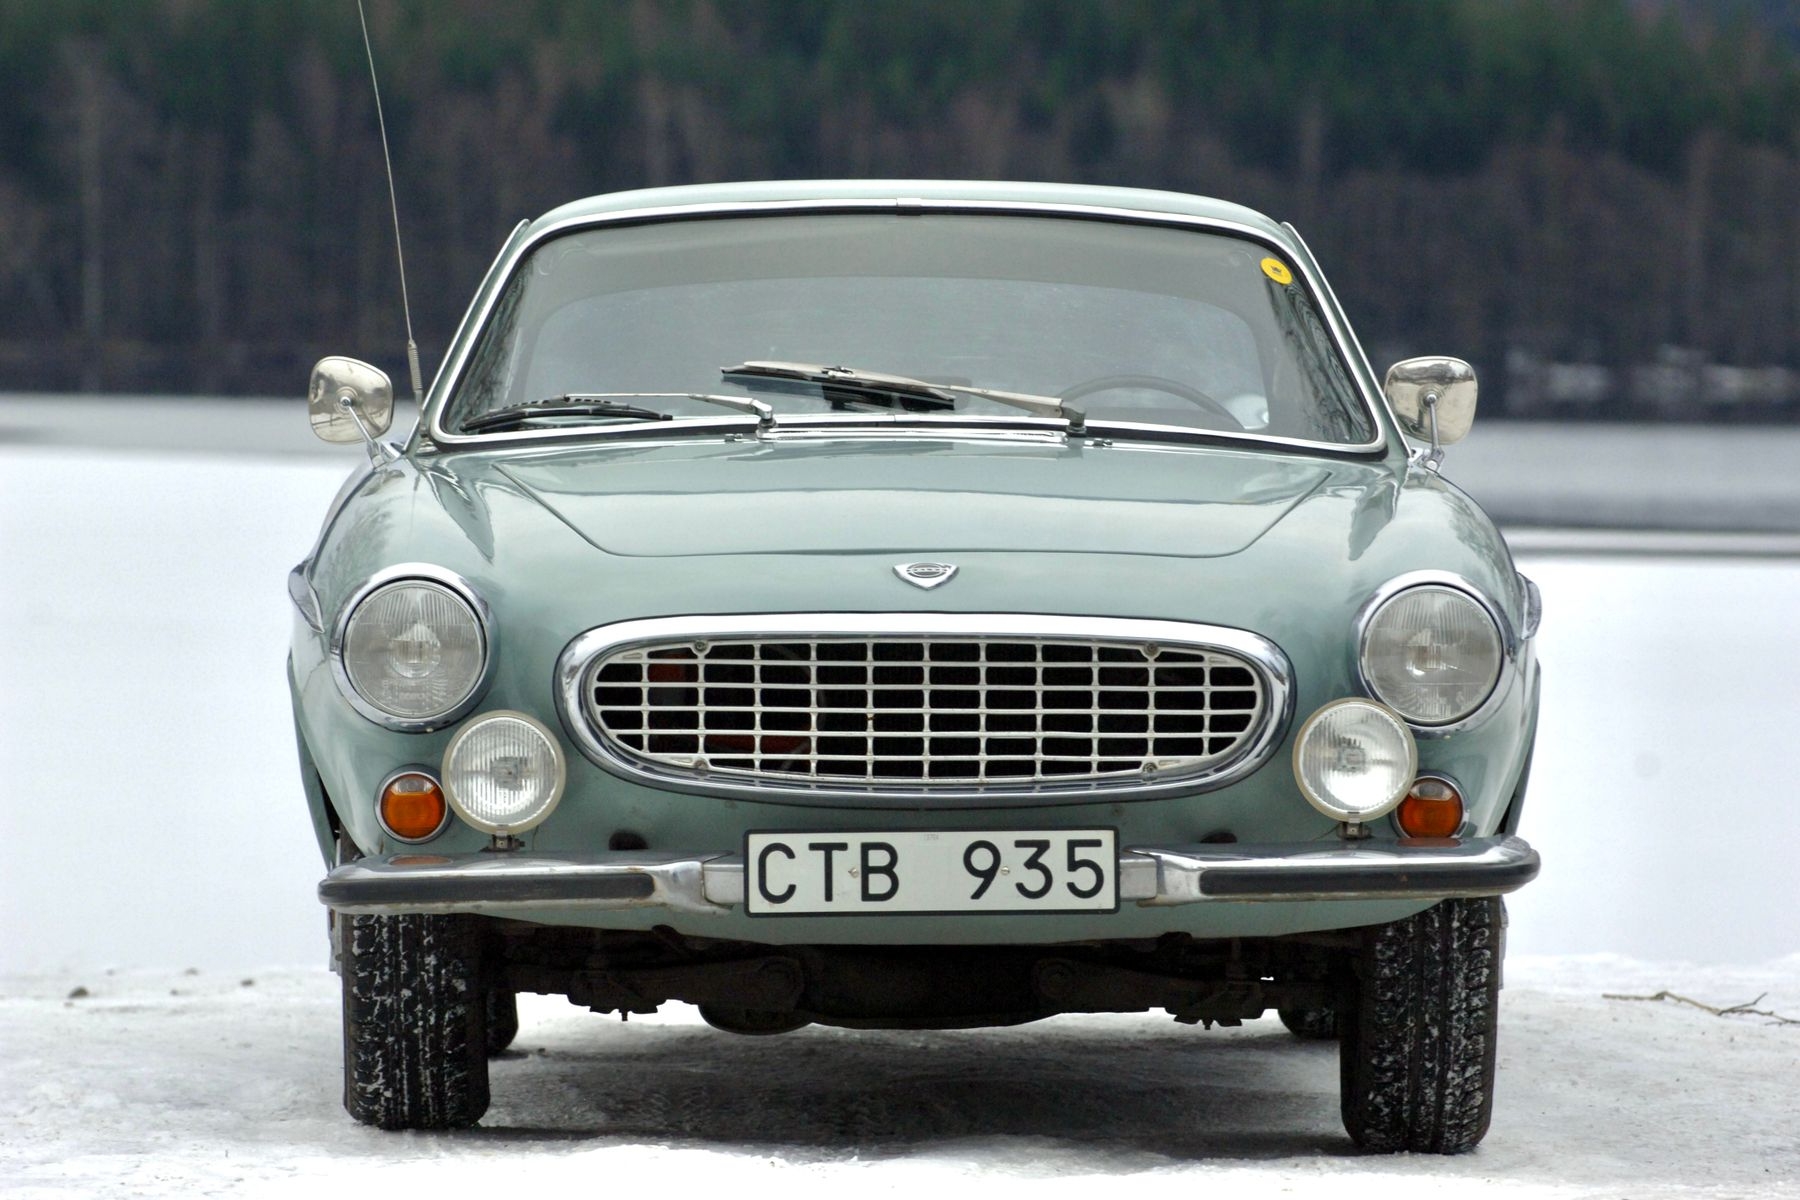 King of Swedens Volvo 1800S 6